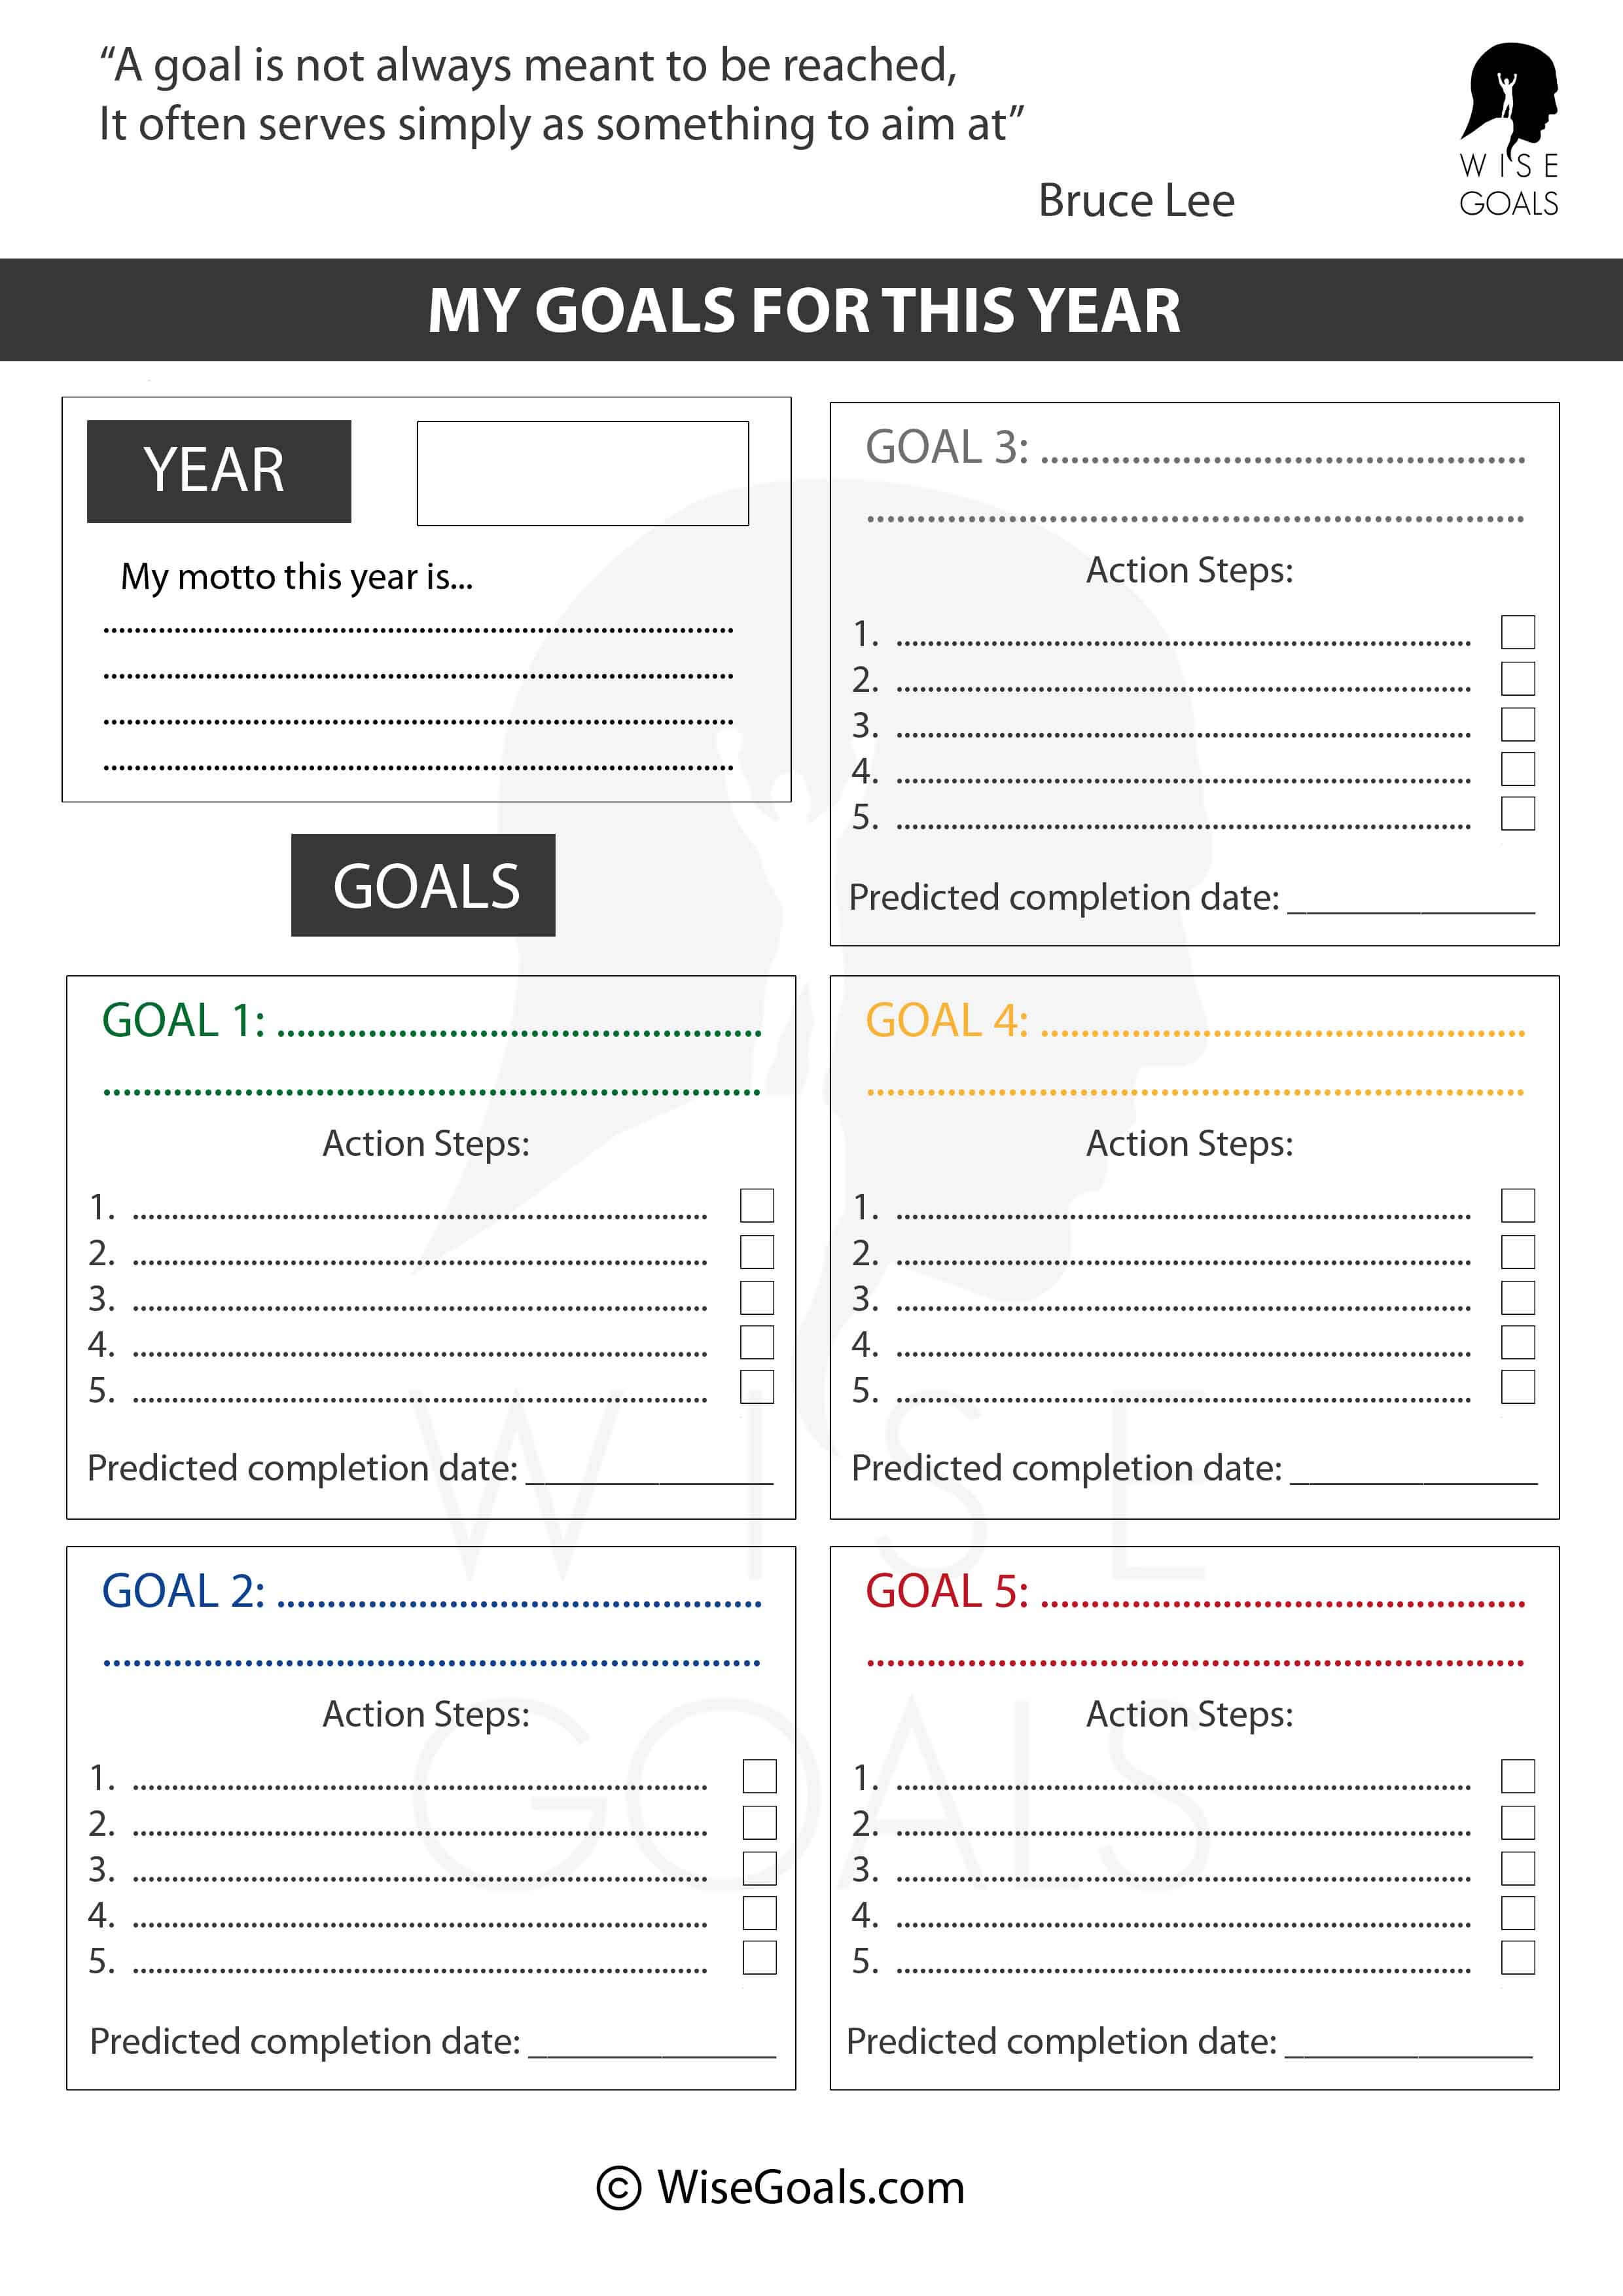 This year's goals worksheet